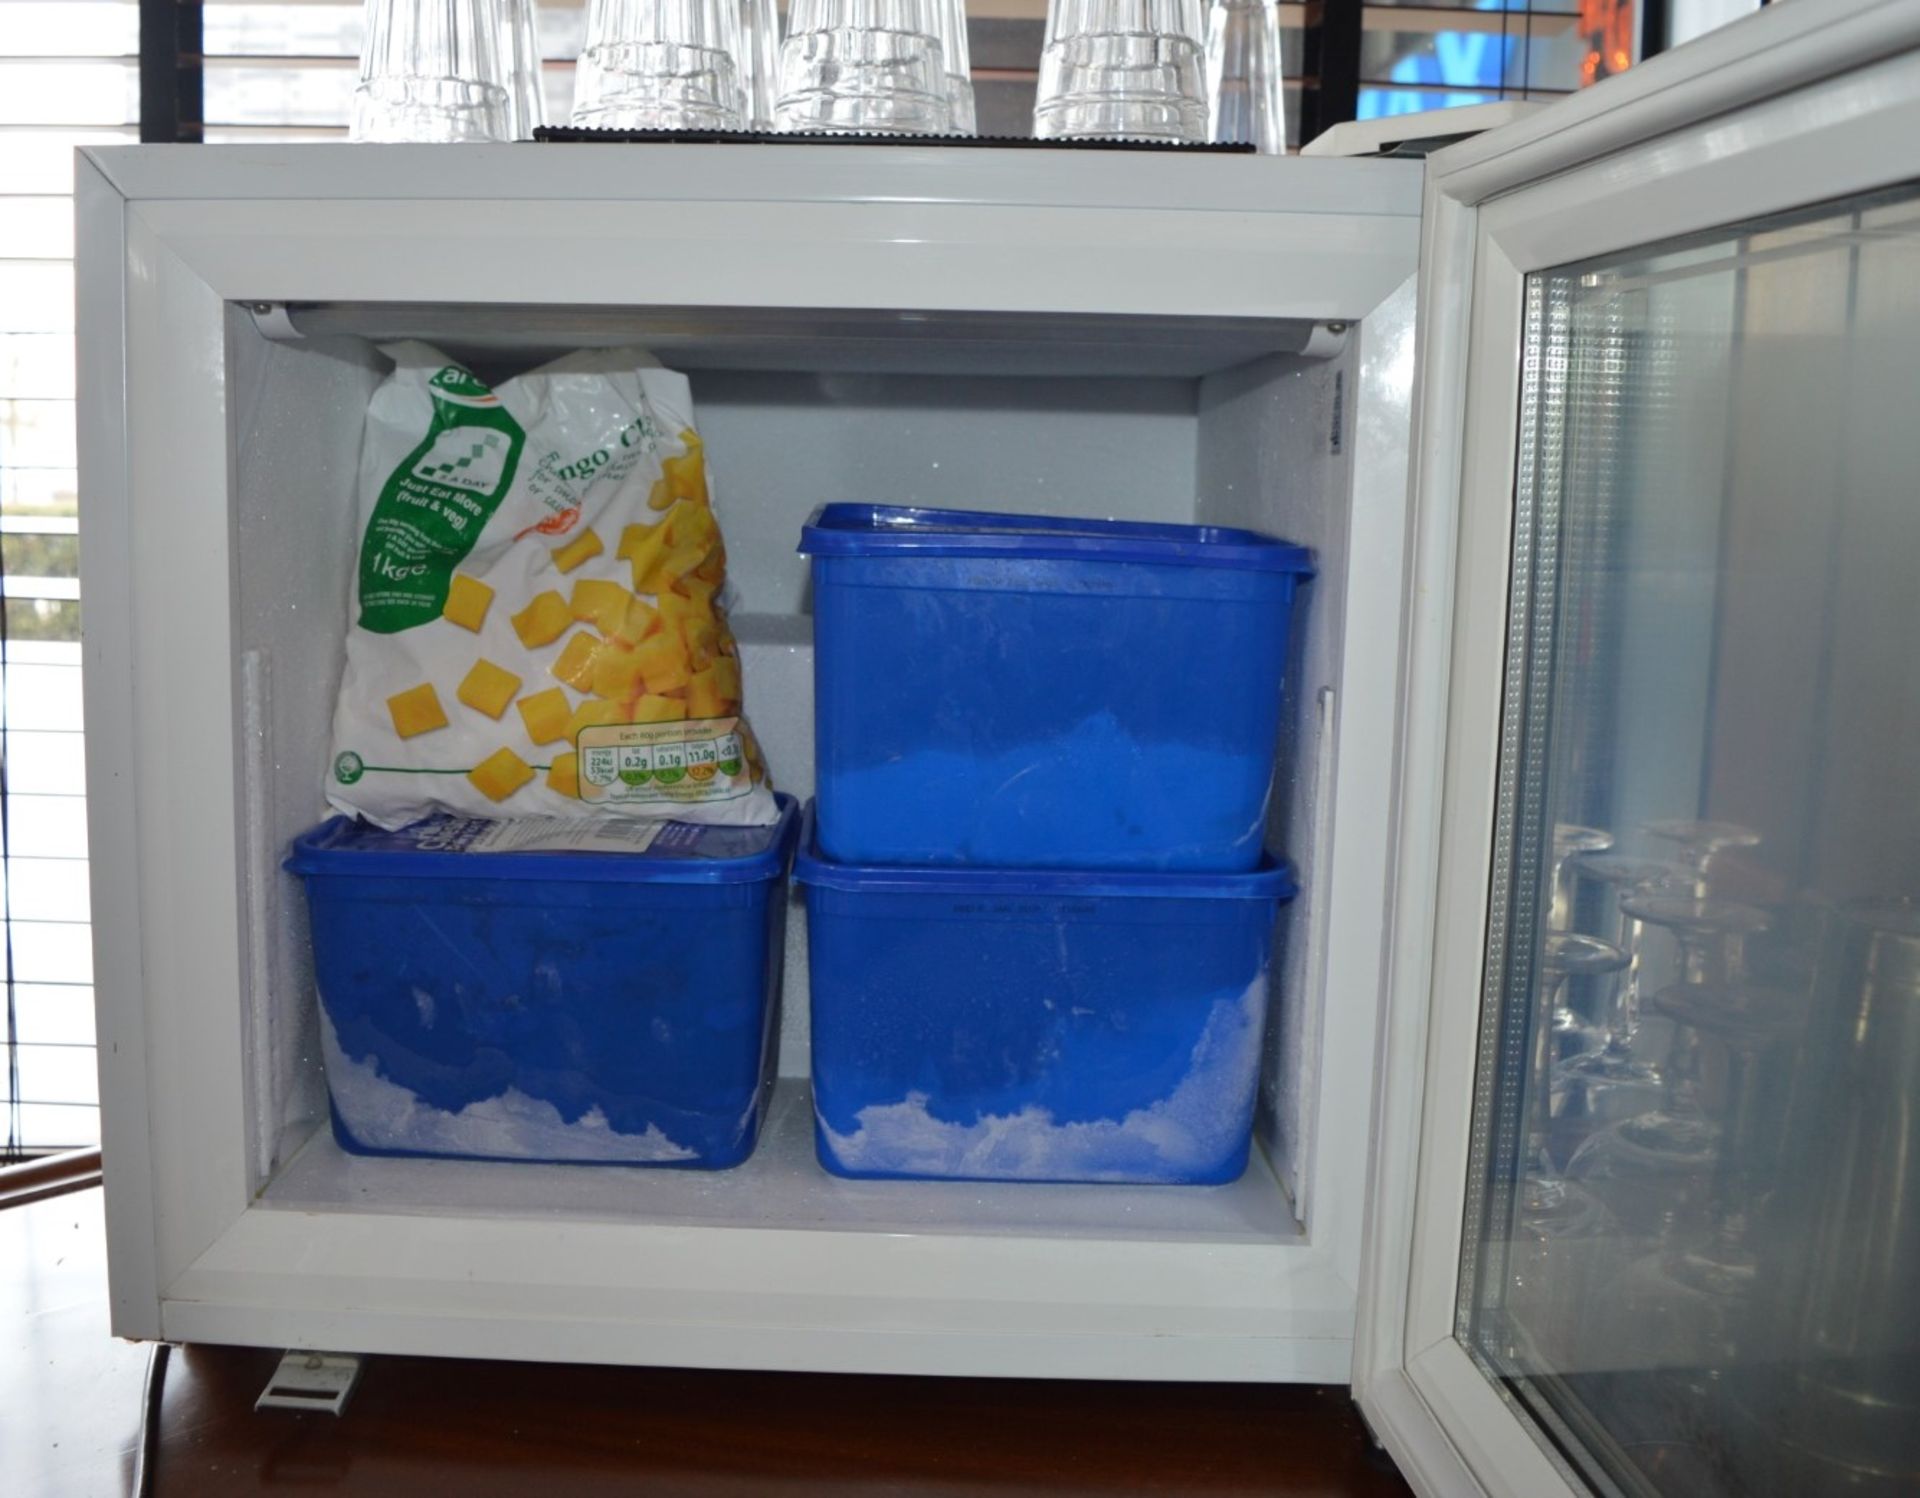 1 x Tefcold Mini Freezer With Glass Front - H50 x W57 x D55 cms - Ref BB1014 -  CL366 - Location: - Image 2 of 2